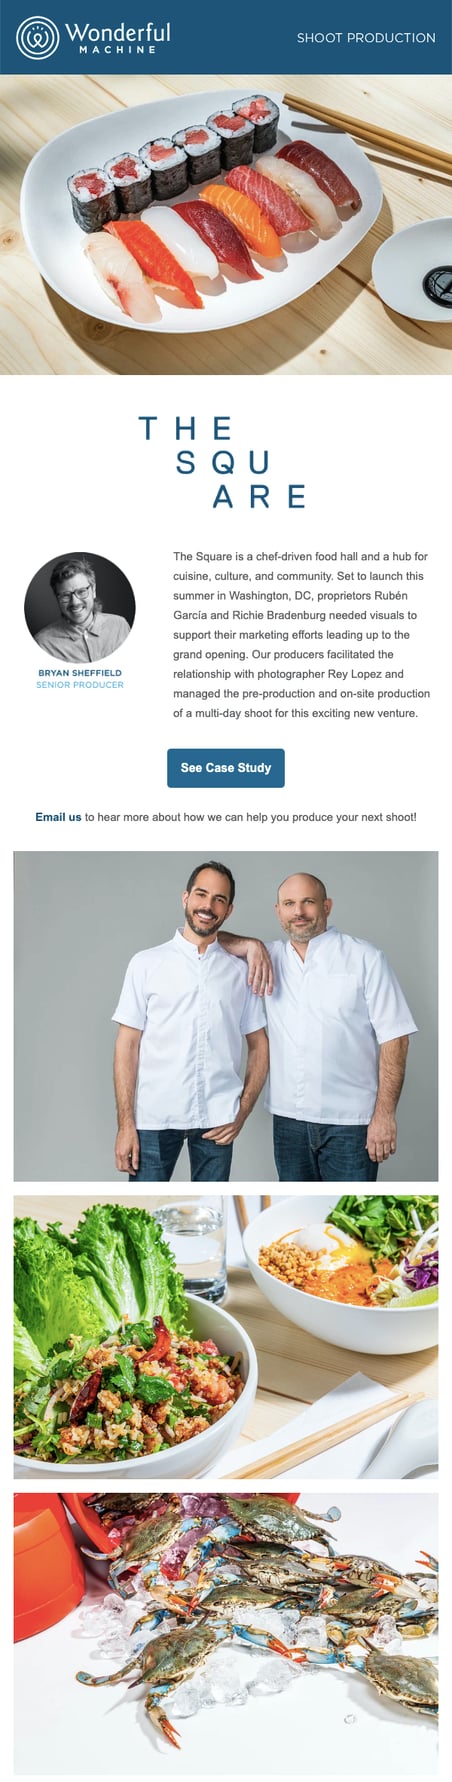 Shoot Production: The Square emailer